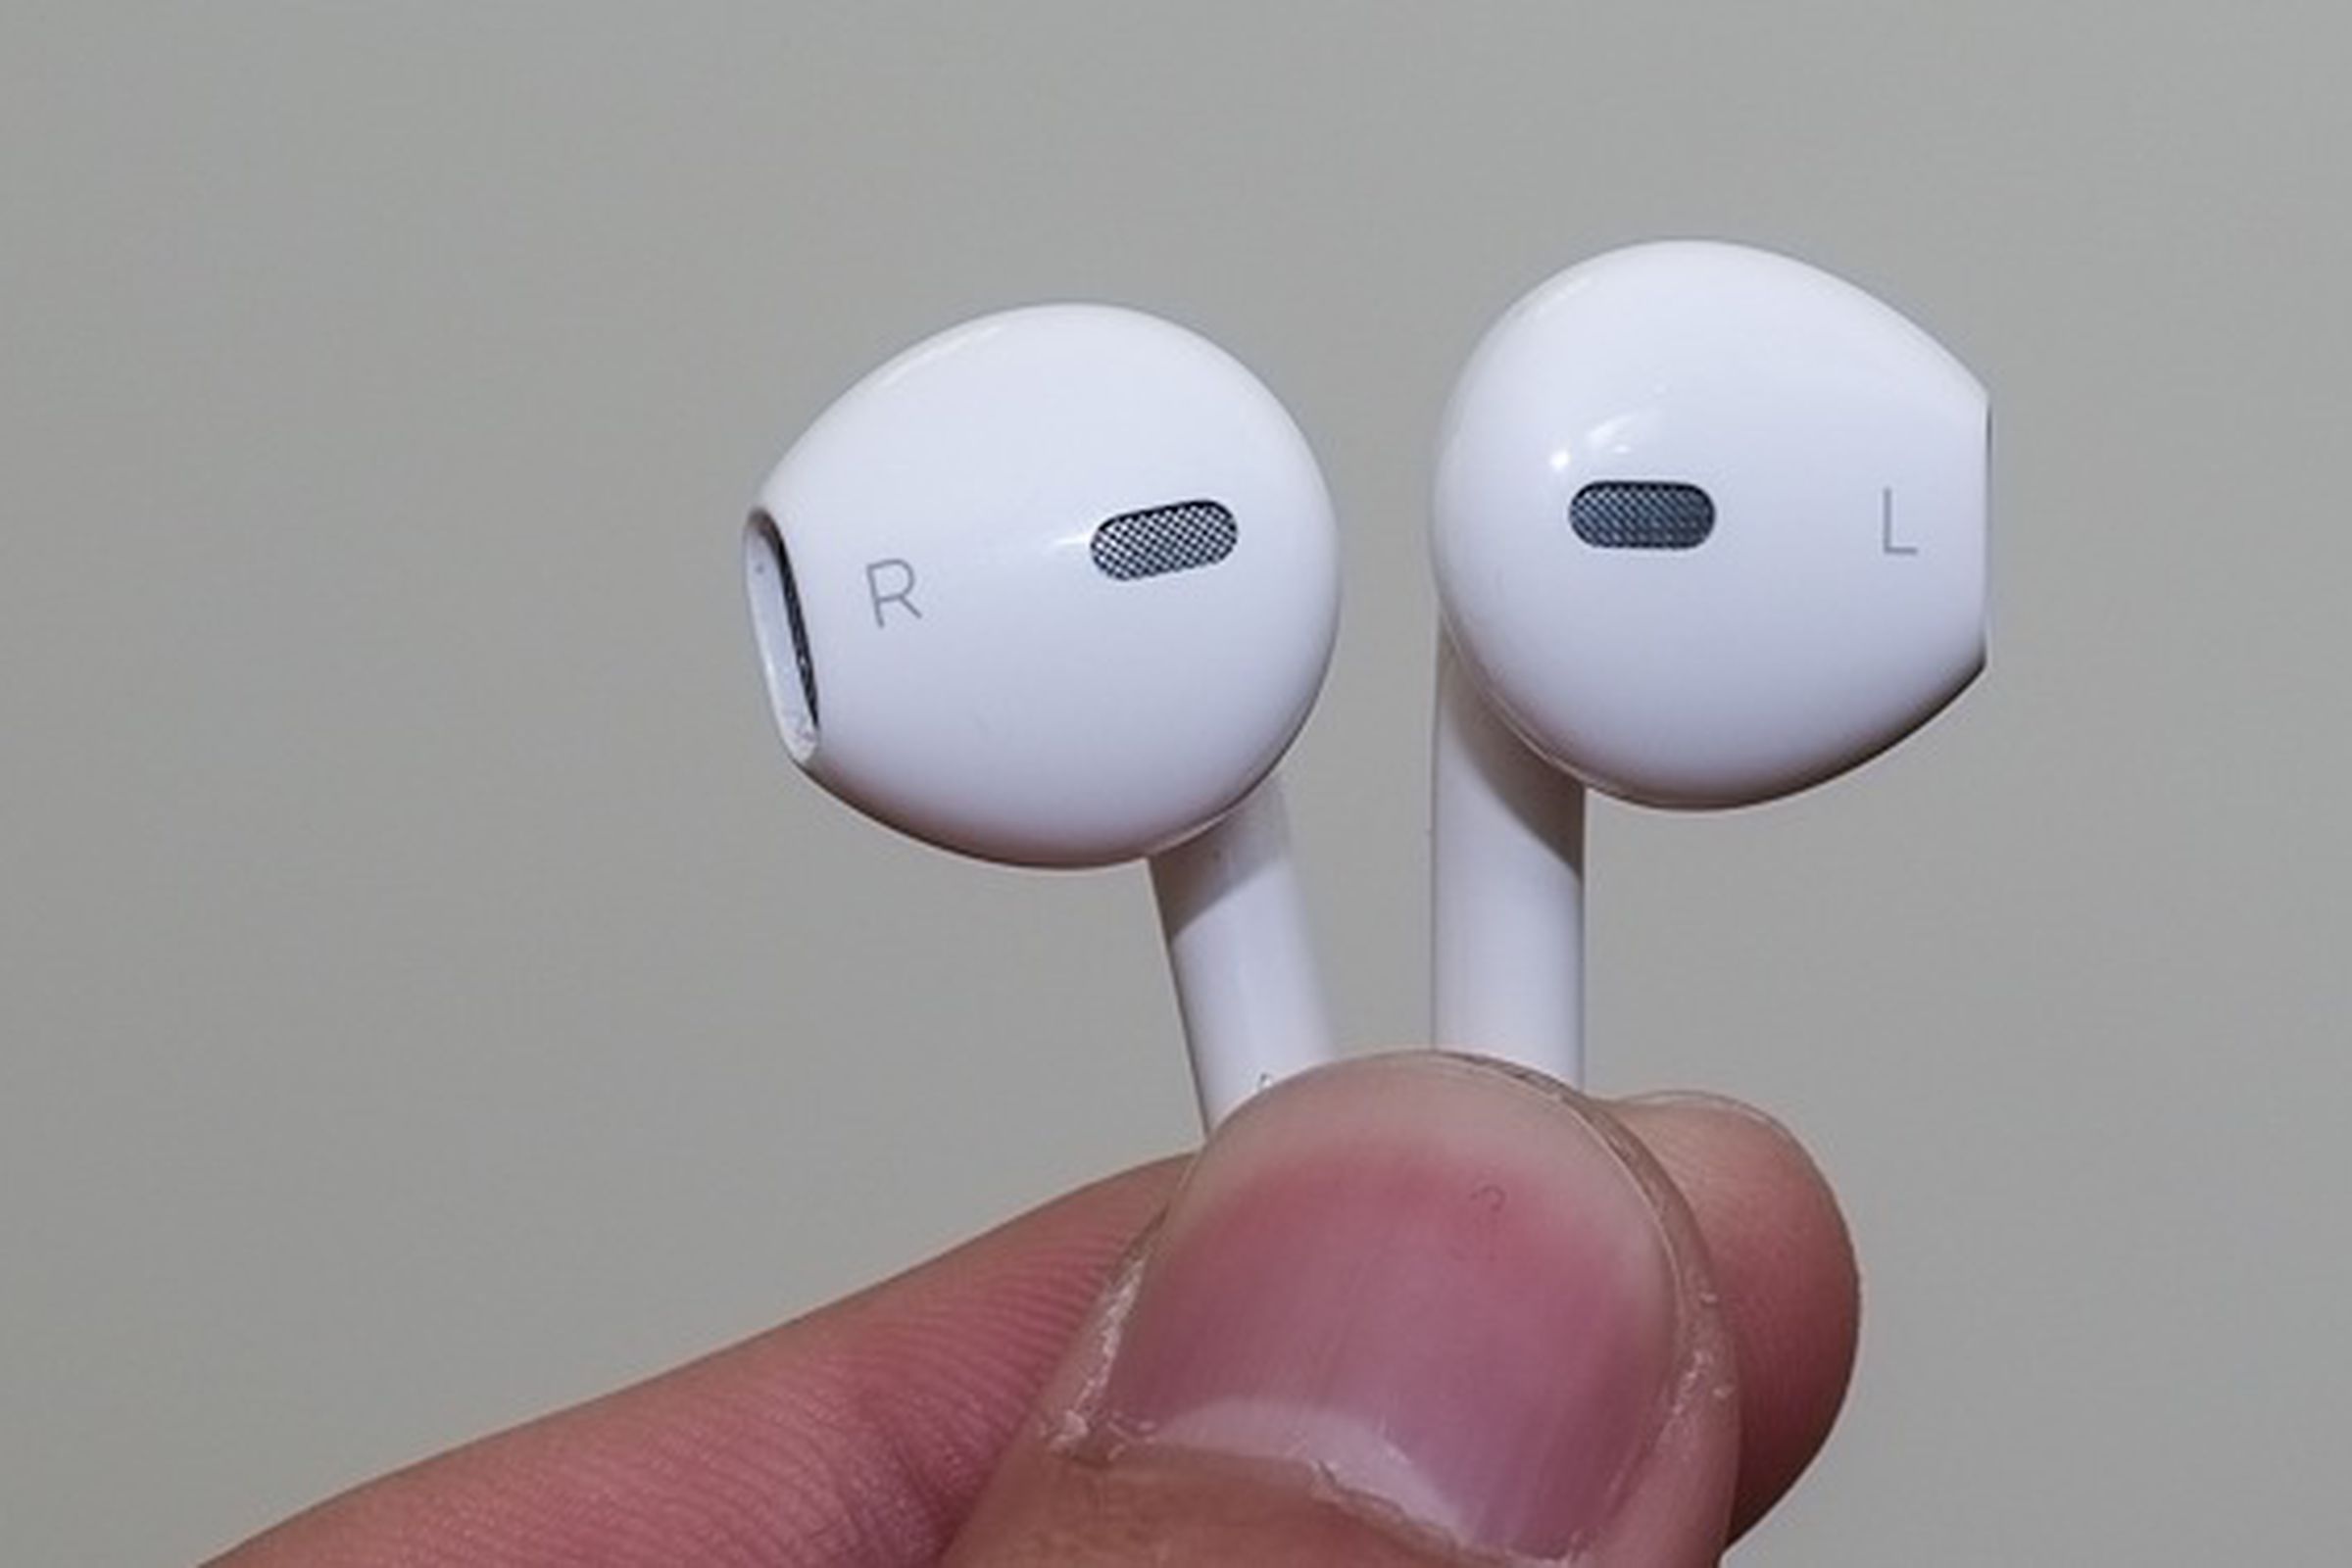 new apple earbuds (tinhte)